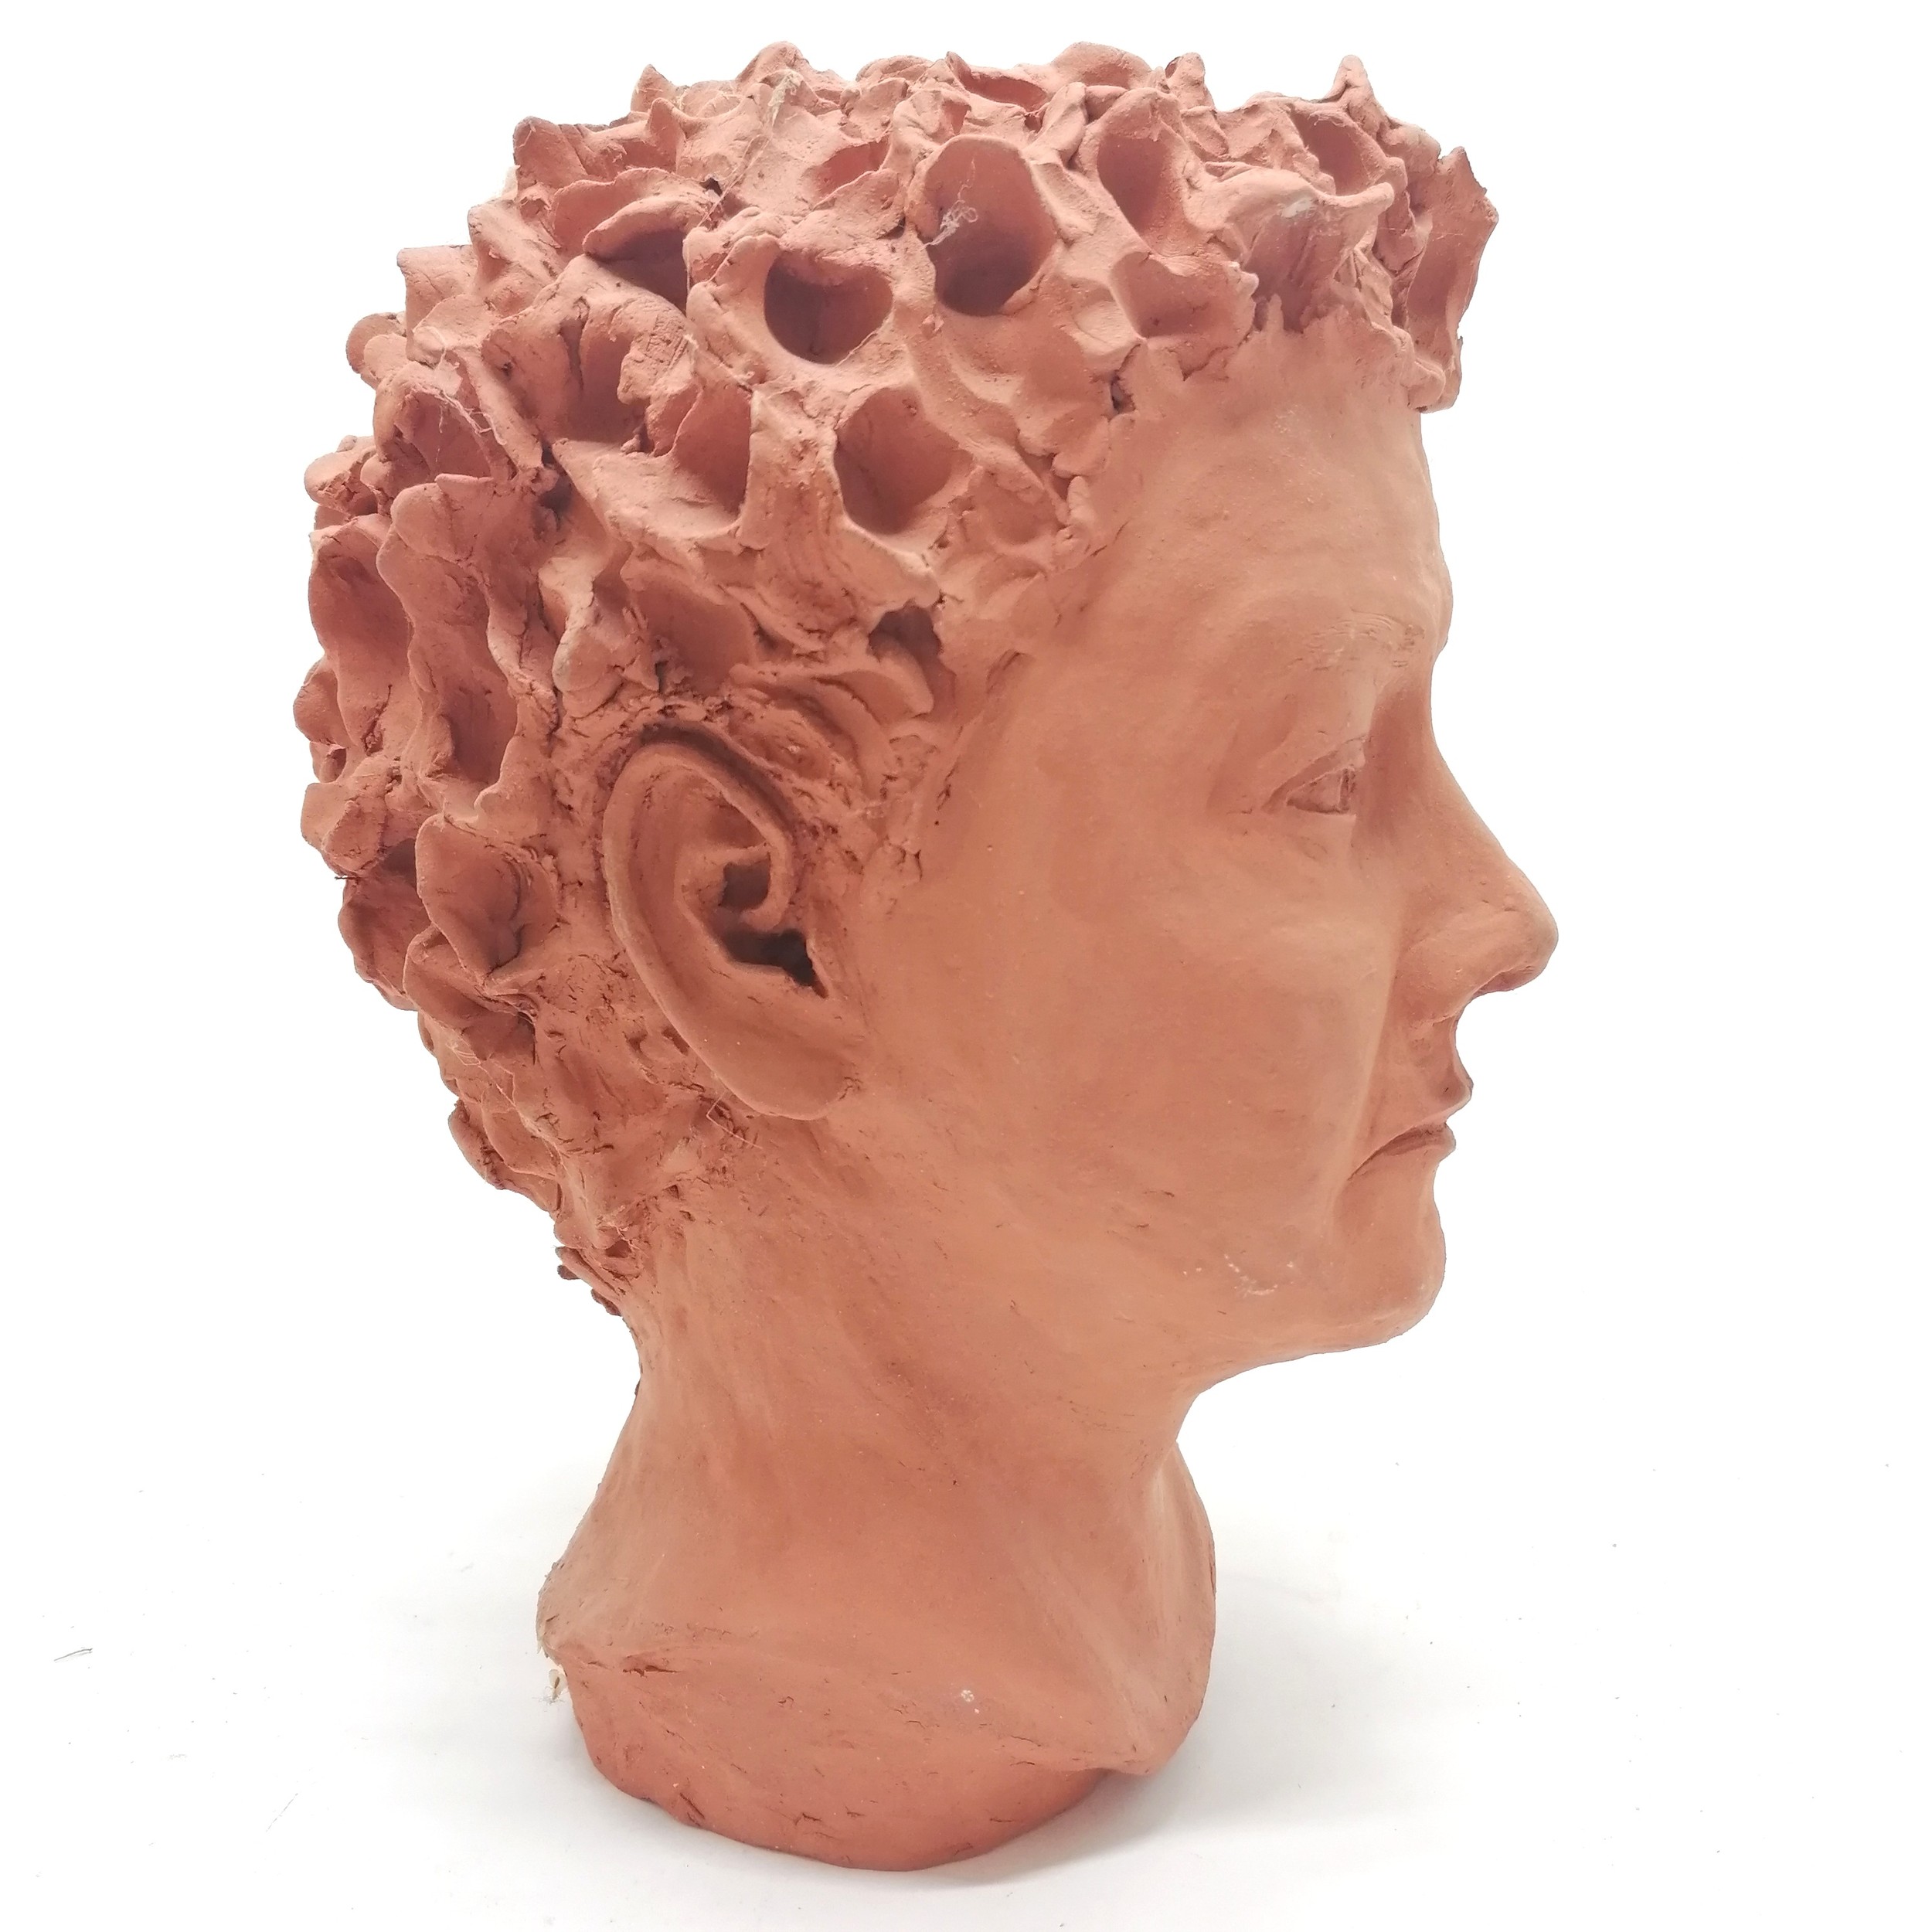 2 terracotta sculpted heads the biggest 32cm high - Image 3 of 7